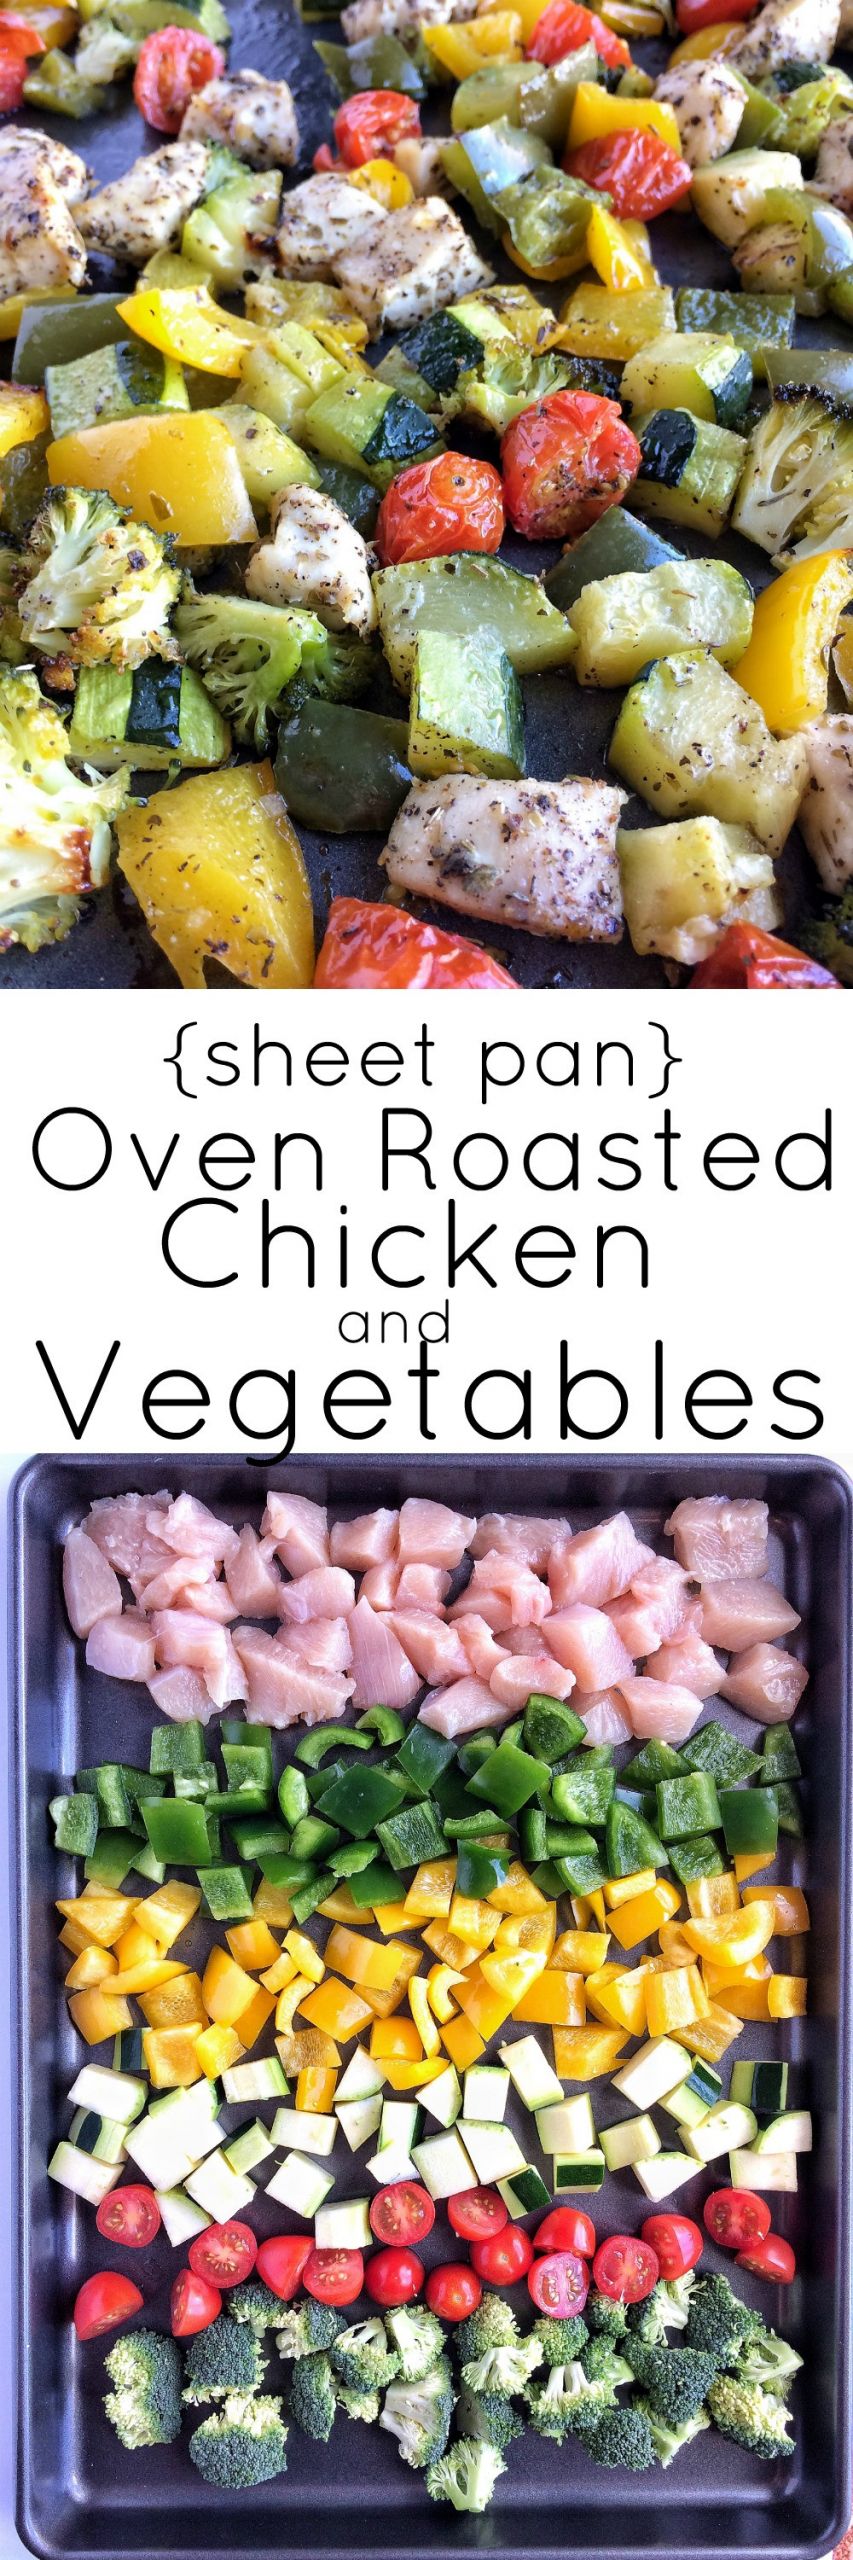 Oven Roasted Chicken And Vegetables
 Oven Roasted Chicken and Ve ables To her as Family